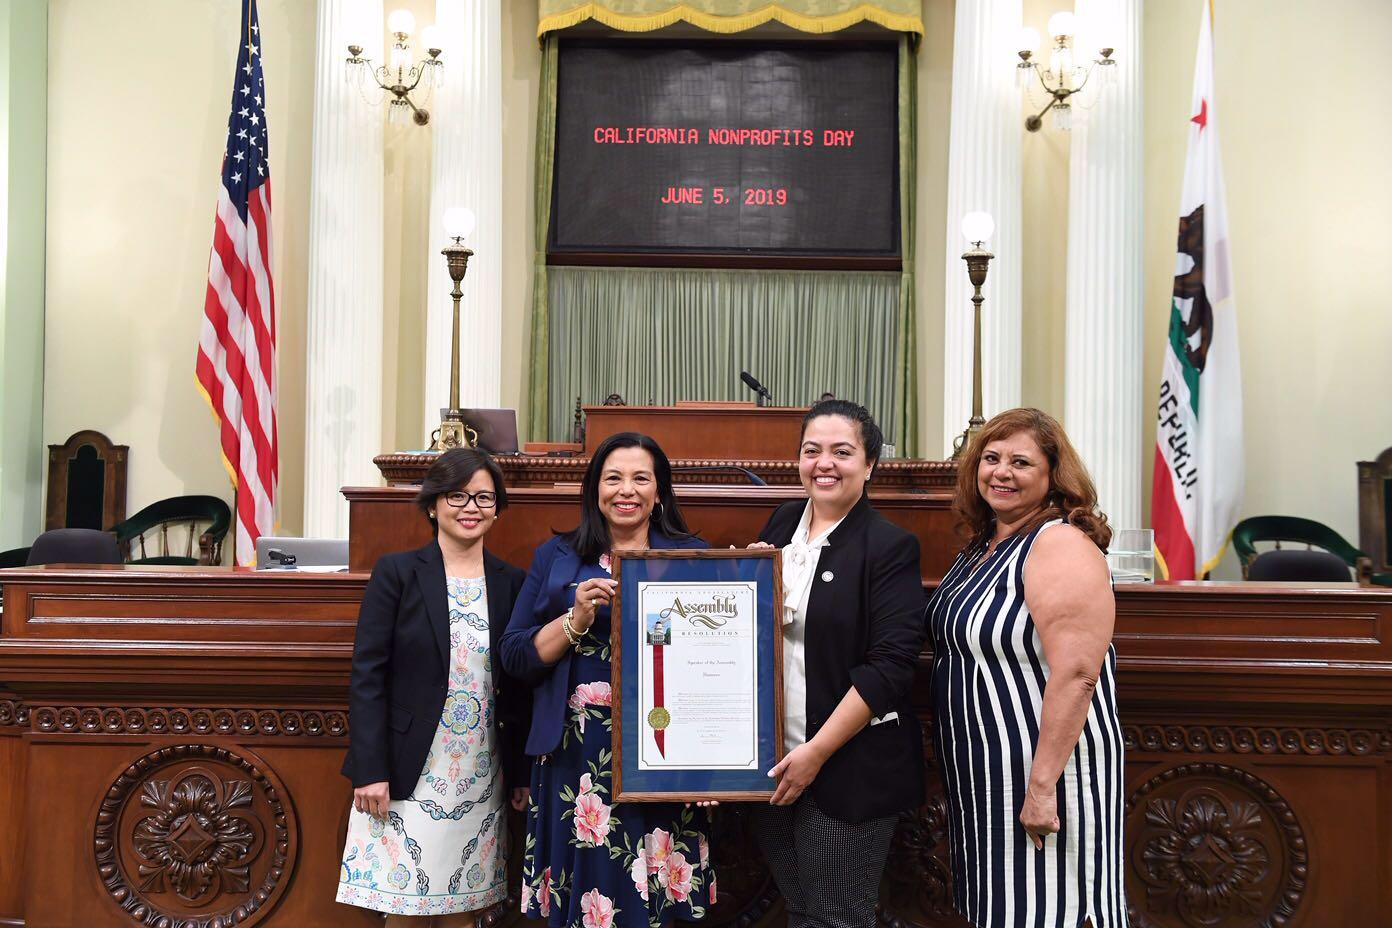  Assemblymember Carrillo Nominates Barrio Action as 2019 Nonprofit of the Year 